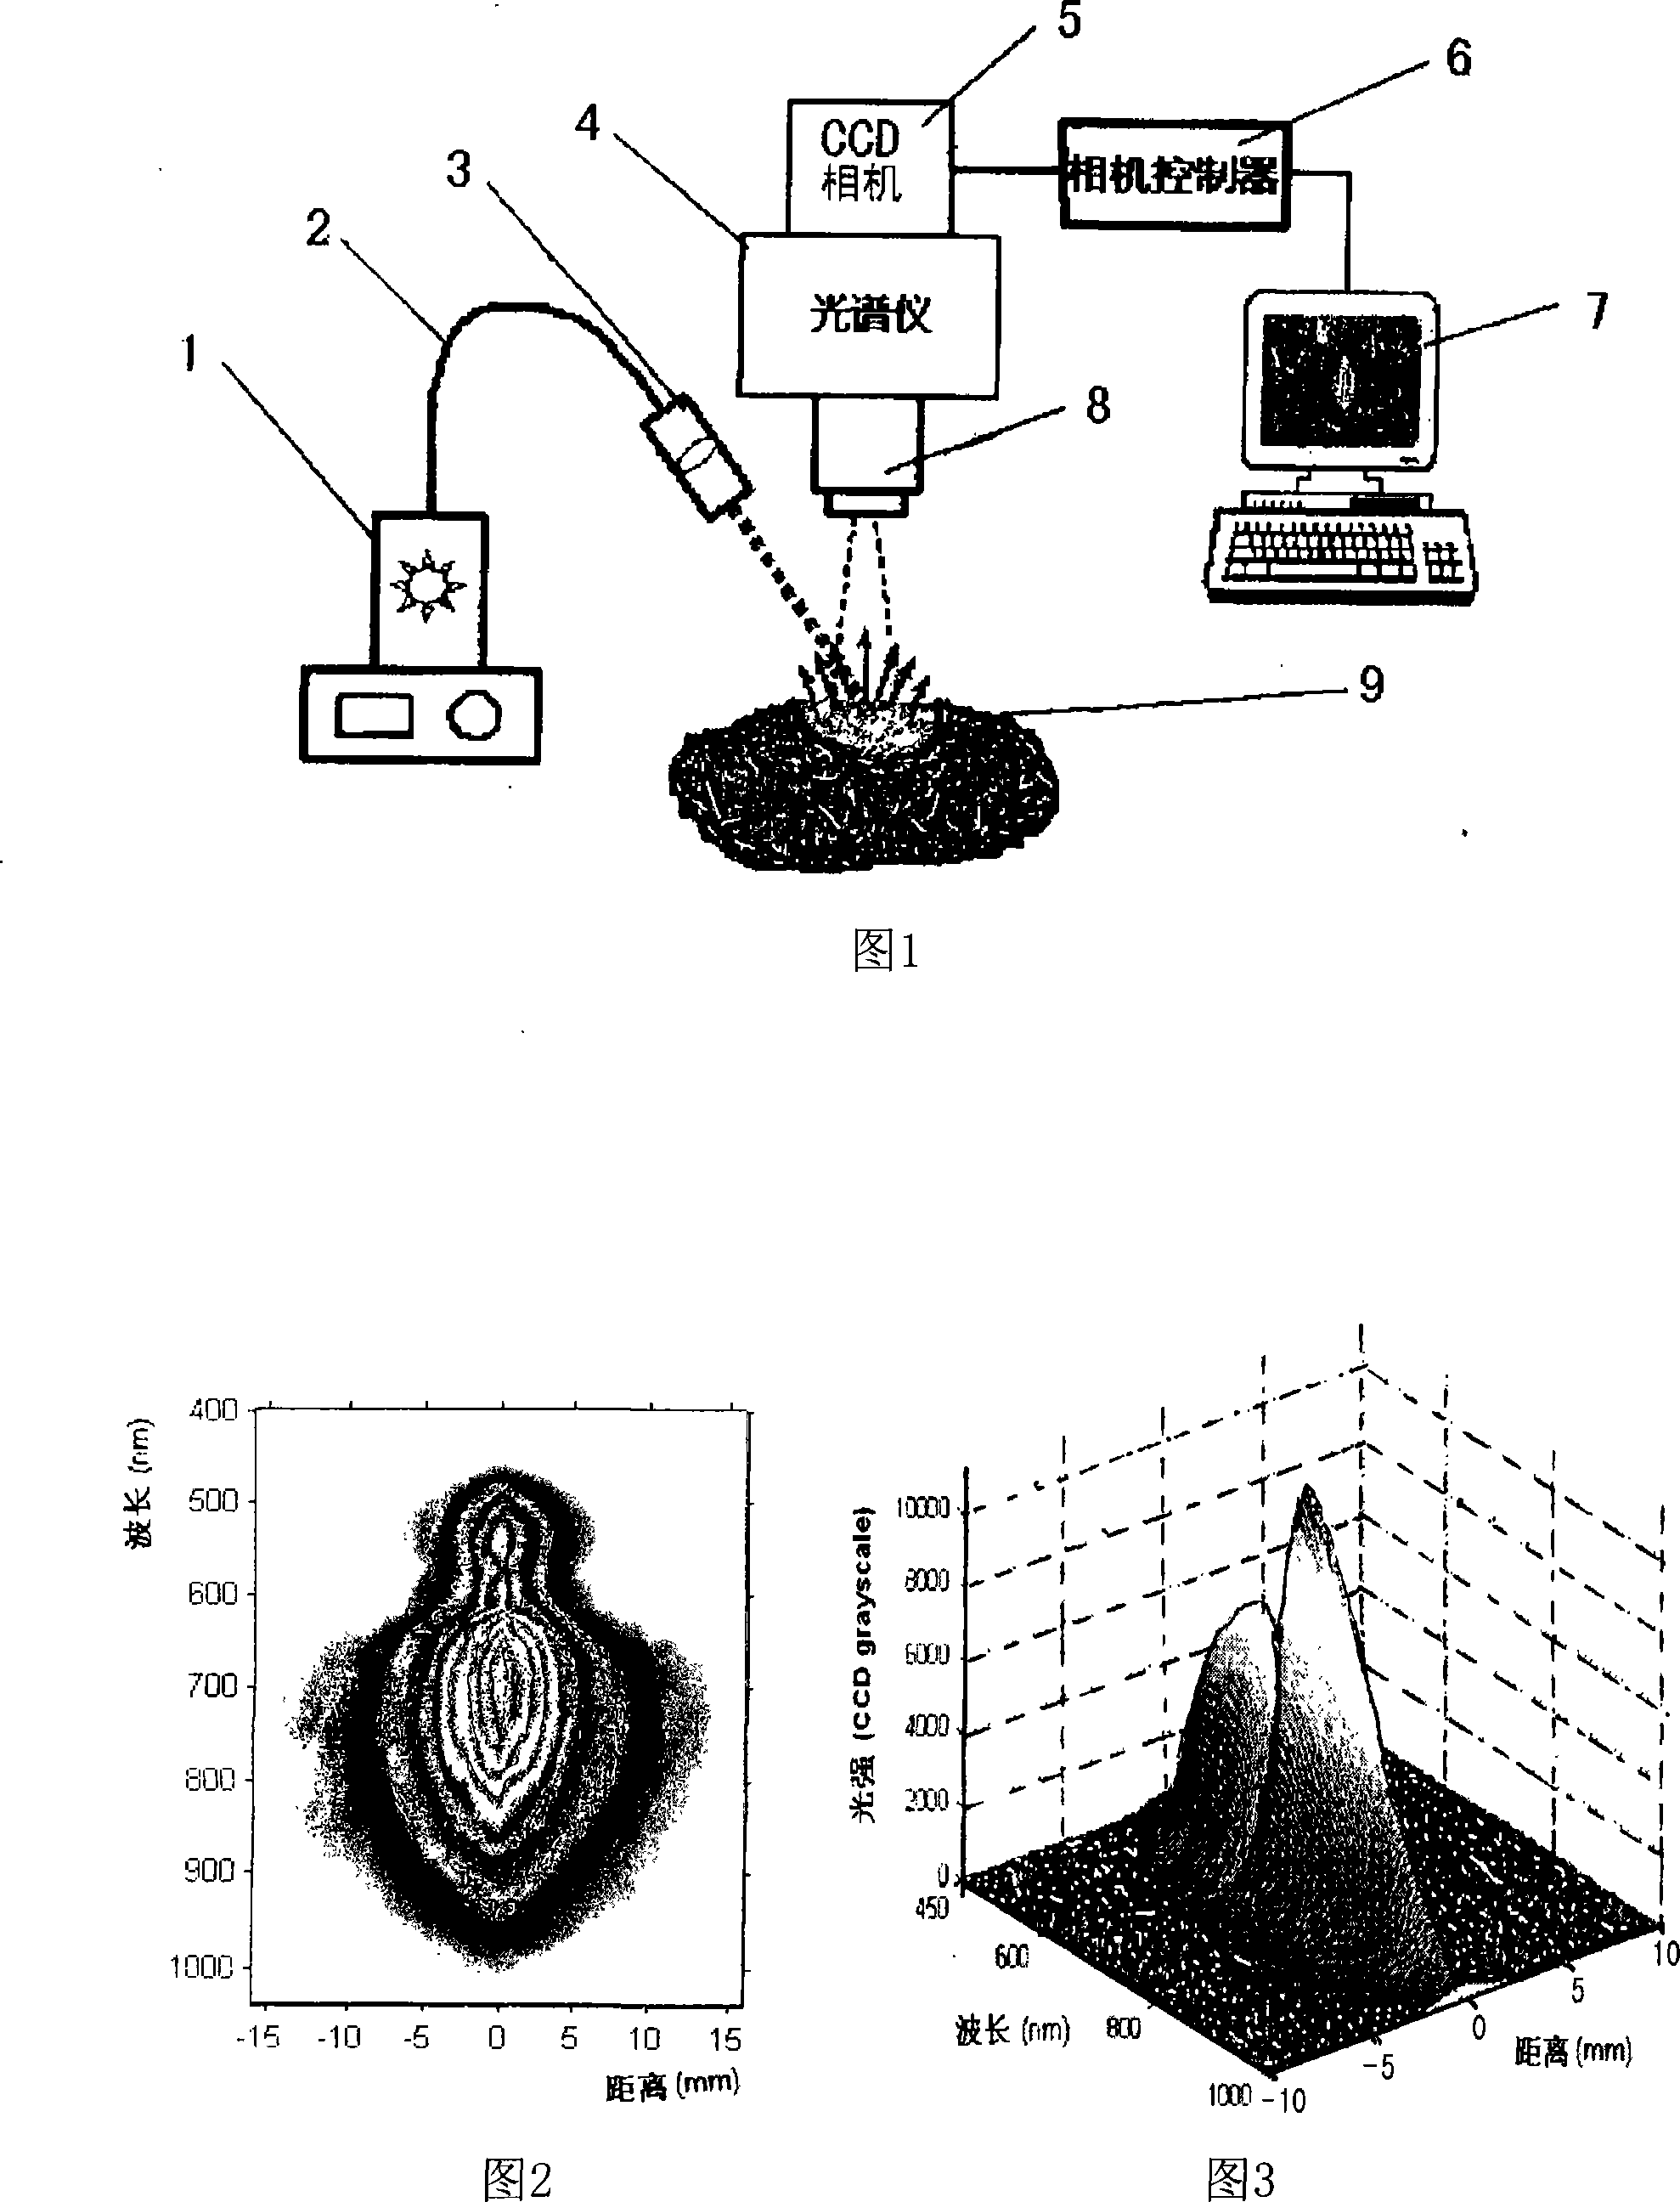 Ultra-optical spectrum image-forming system and testing methods of meat product tenderness nondestructive testing